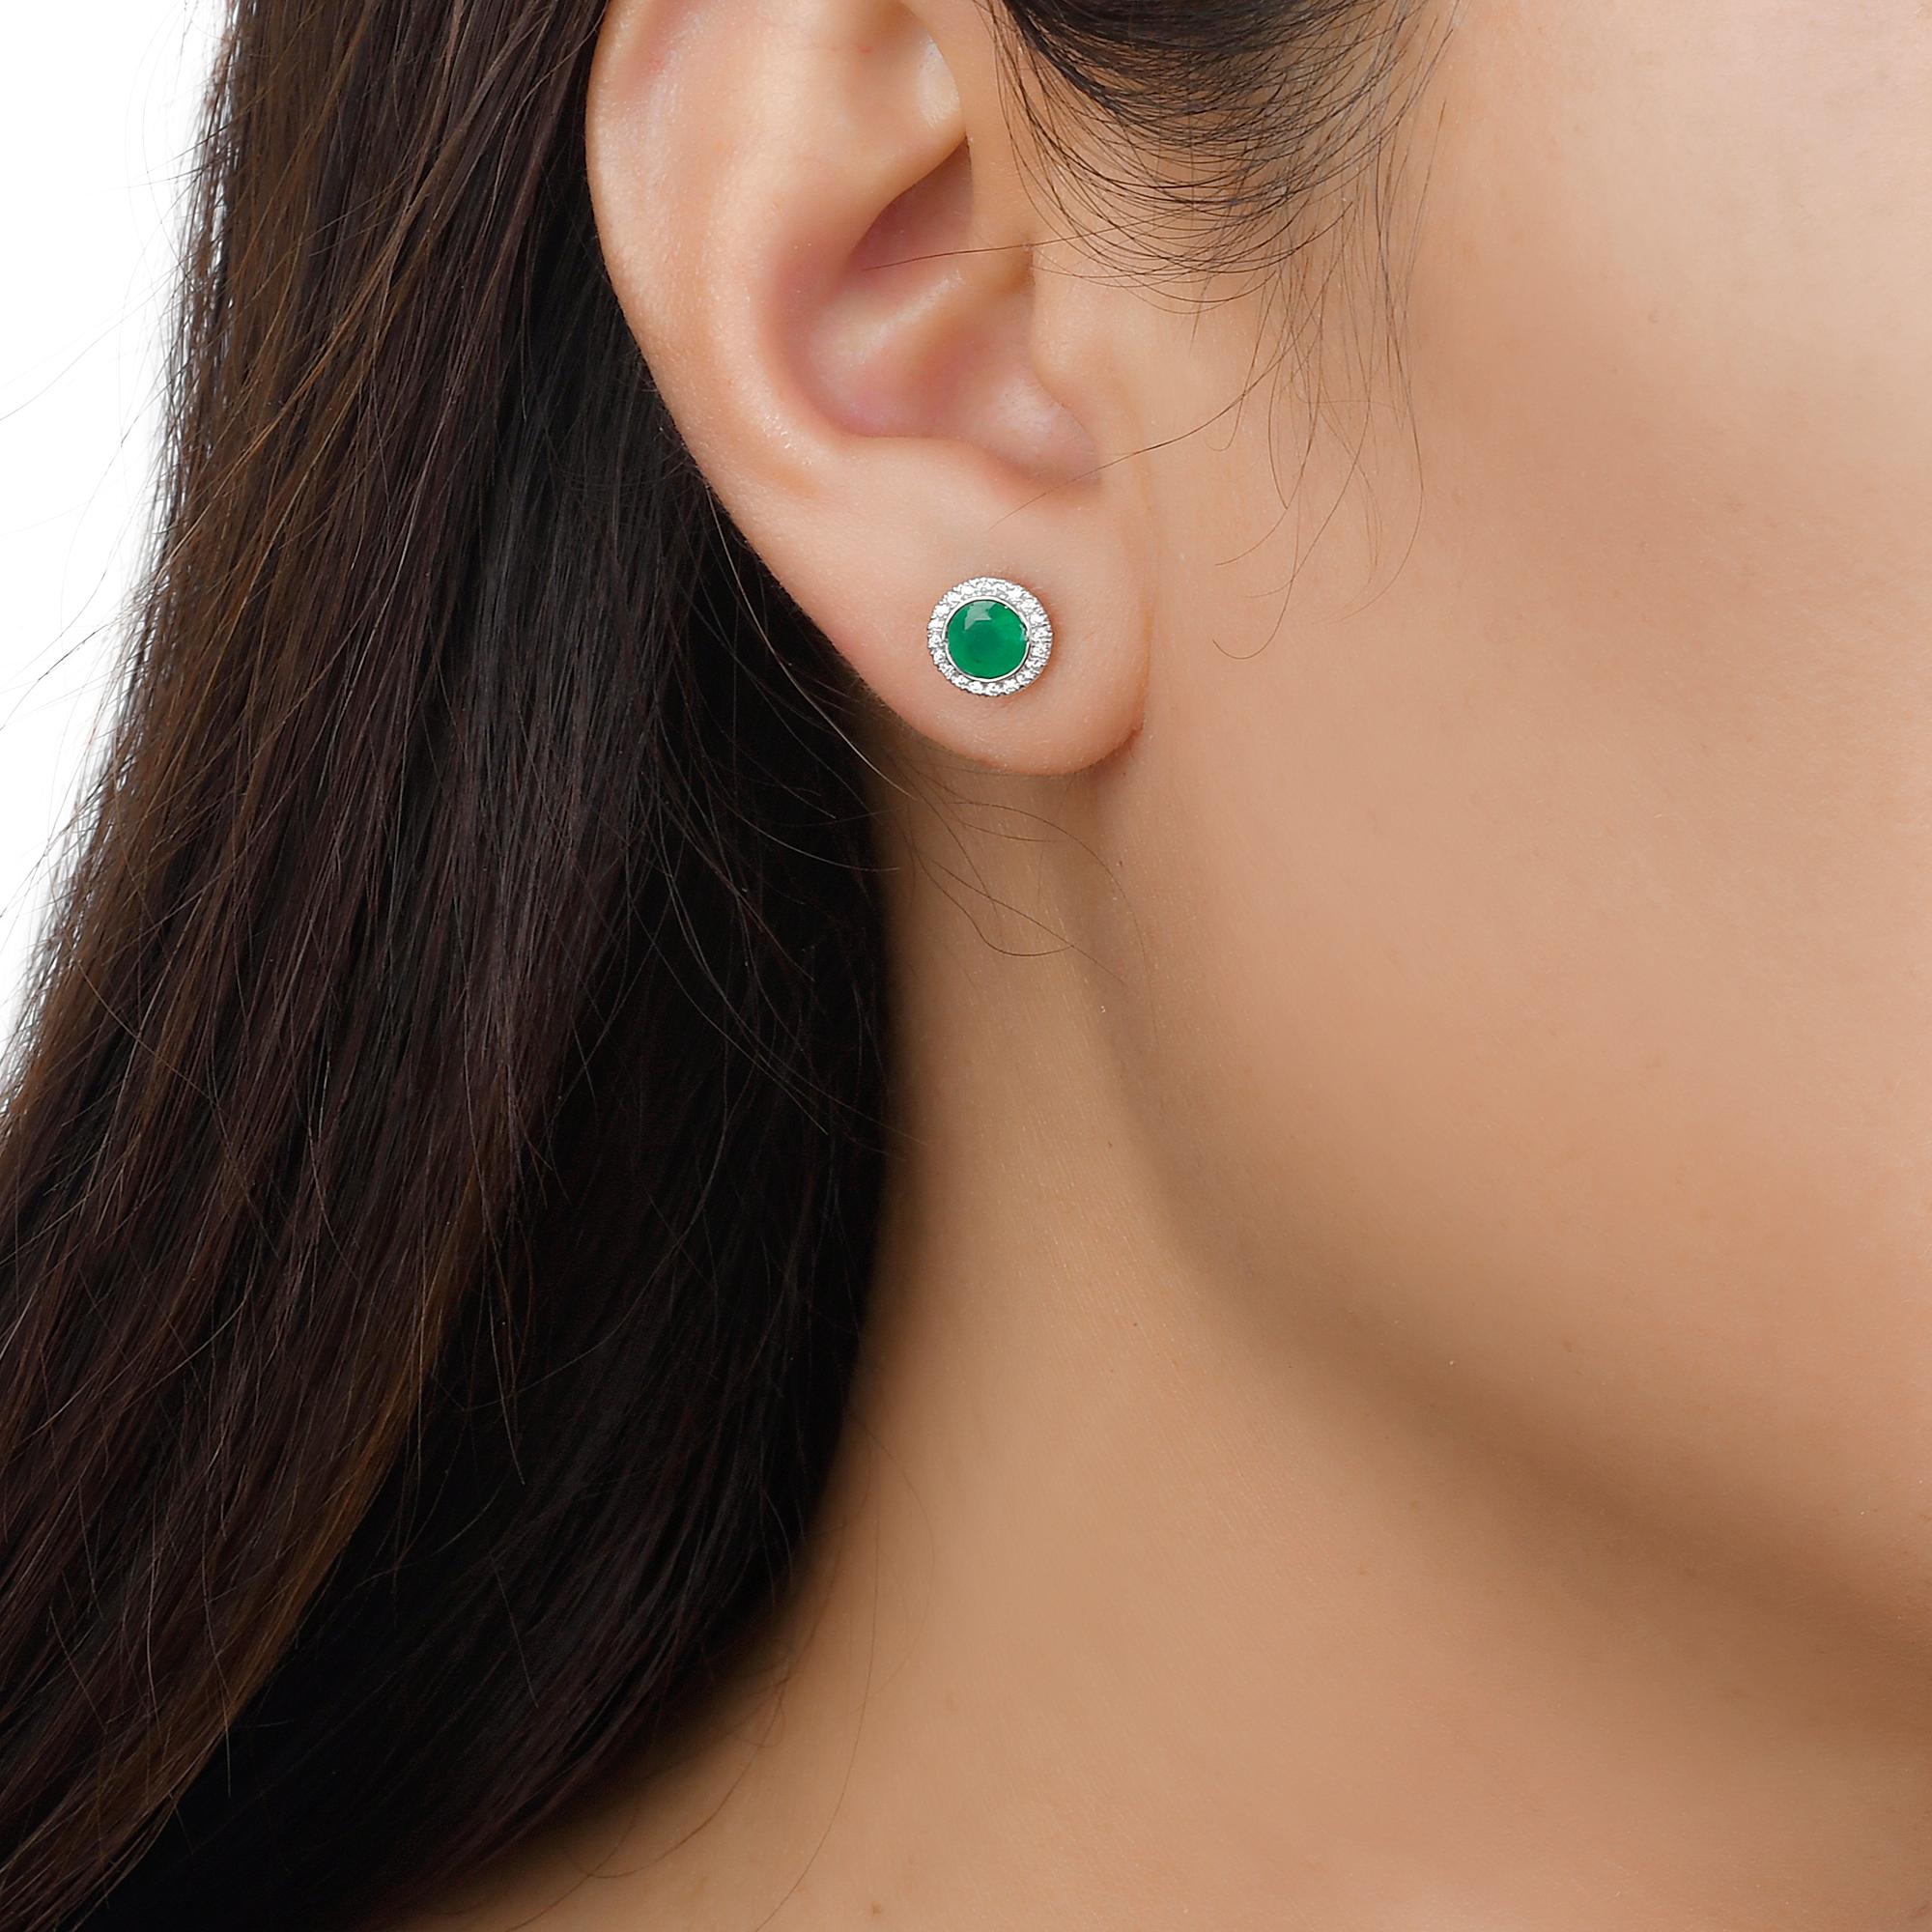 Indulge in luxury with our Emerald and Diamond Halo Stud Earrings in 14K White Gold. Featuring stunning round emeralds, these emerald stud earrings exude sophistication and exclusivity. The dazzling halo design with accompanying diamonds adds an